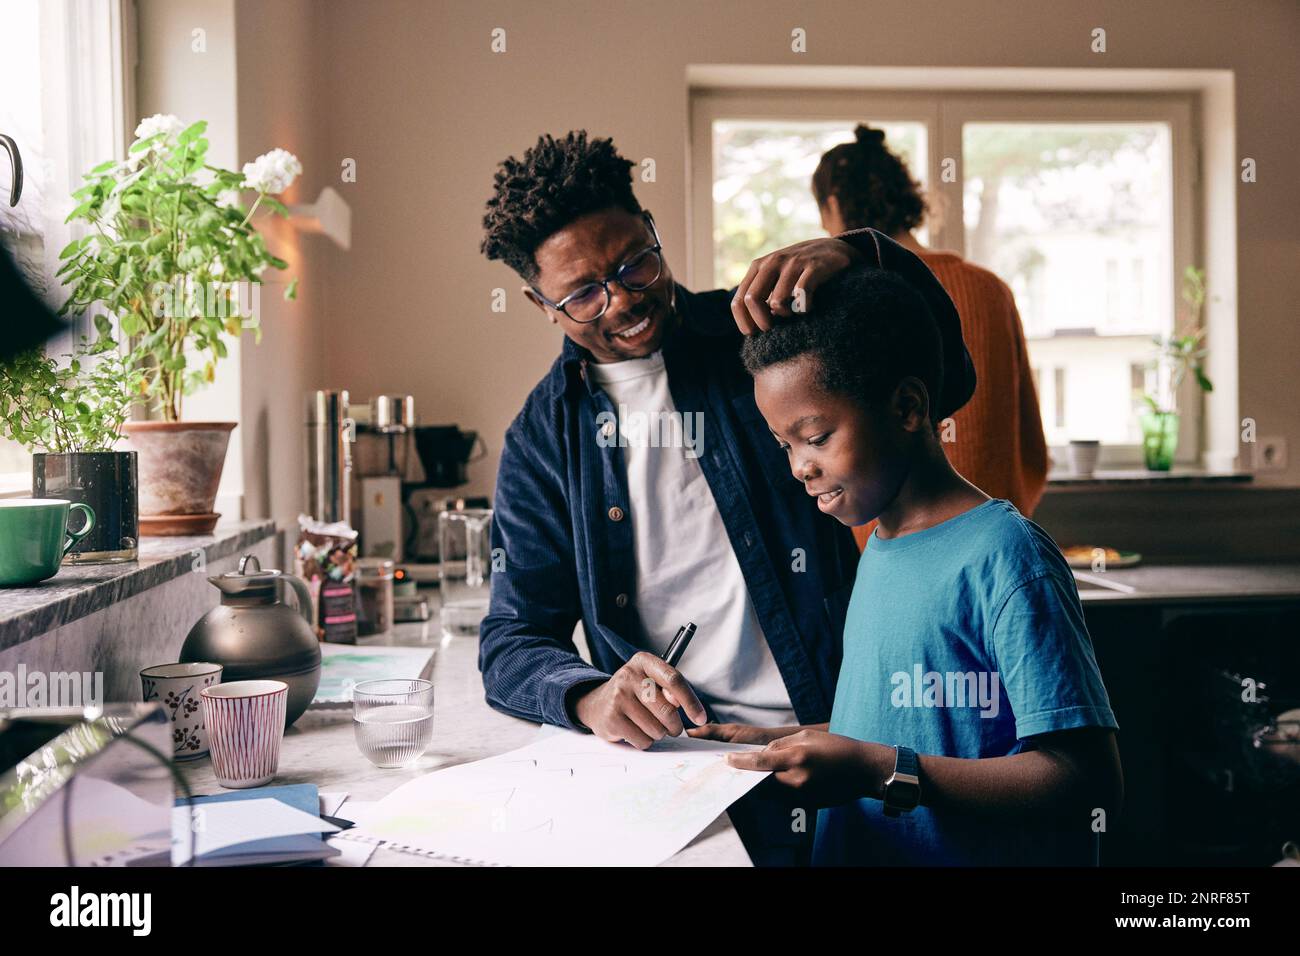 Smiling father caressing hair of son doing homework at home Stock Photo